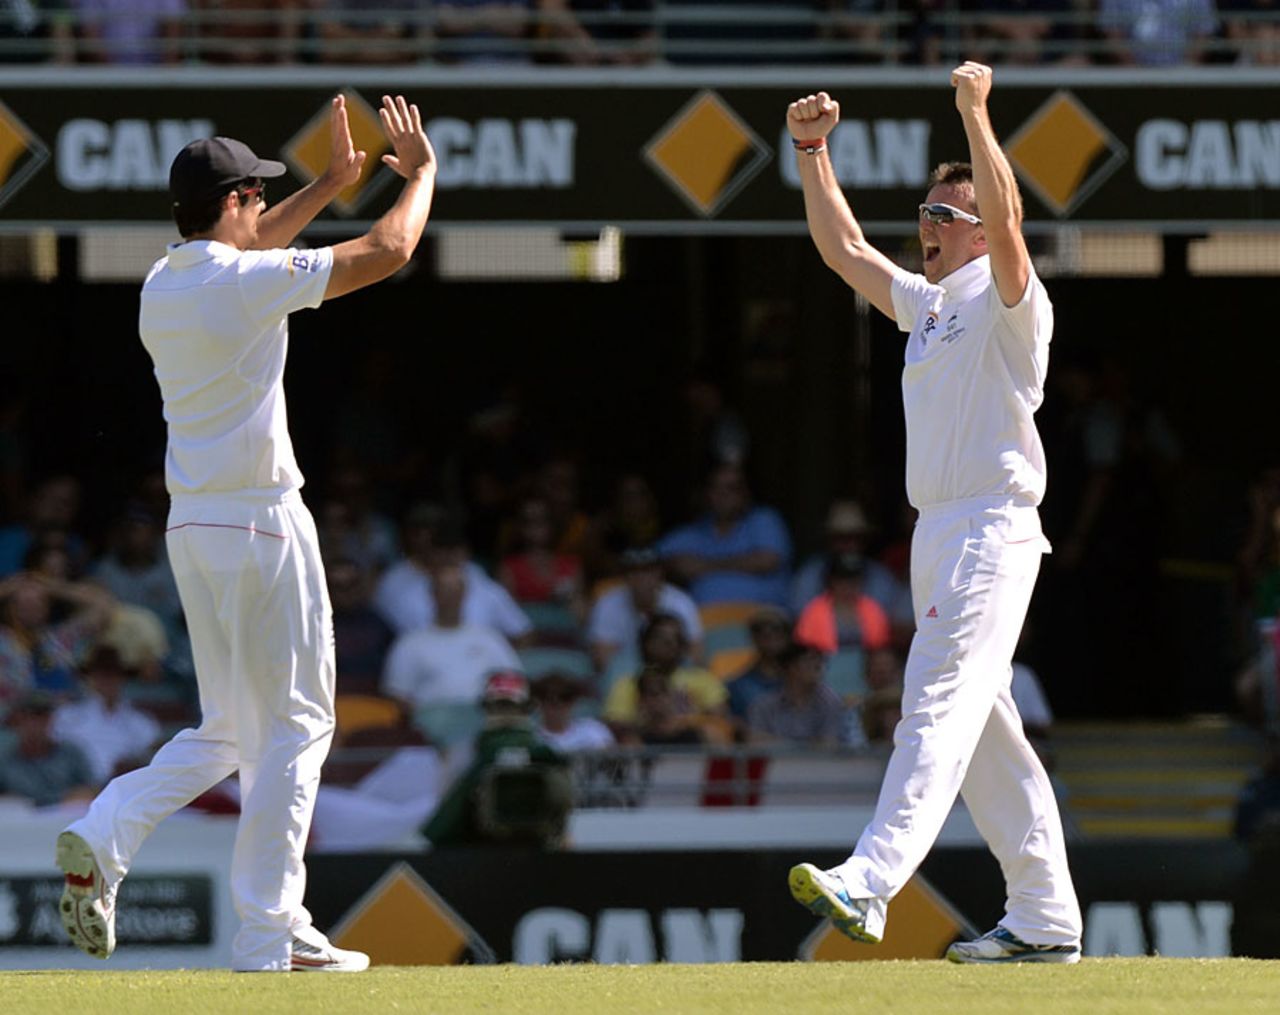 There was relief for Graeme Swann when he finally claimed a wicket, Australia v England, 1st Test, Brisbane, 3rd day, November 23, 2013